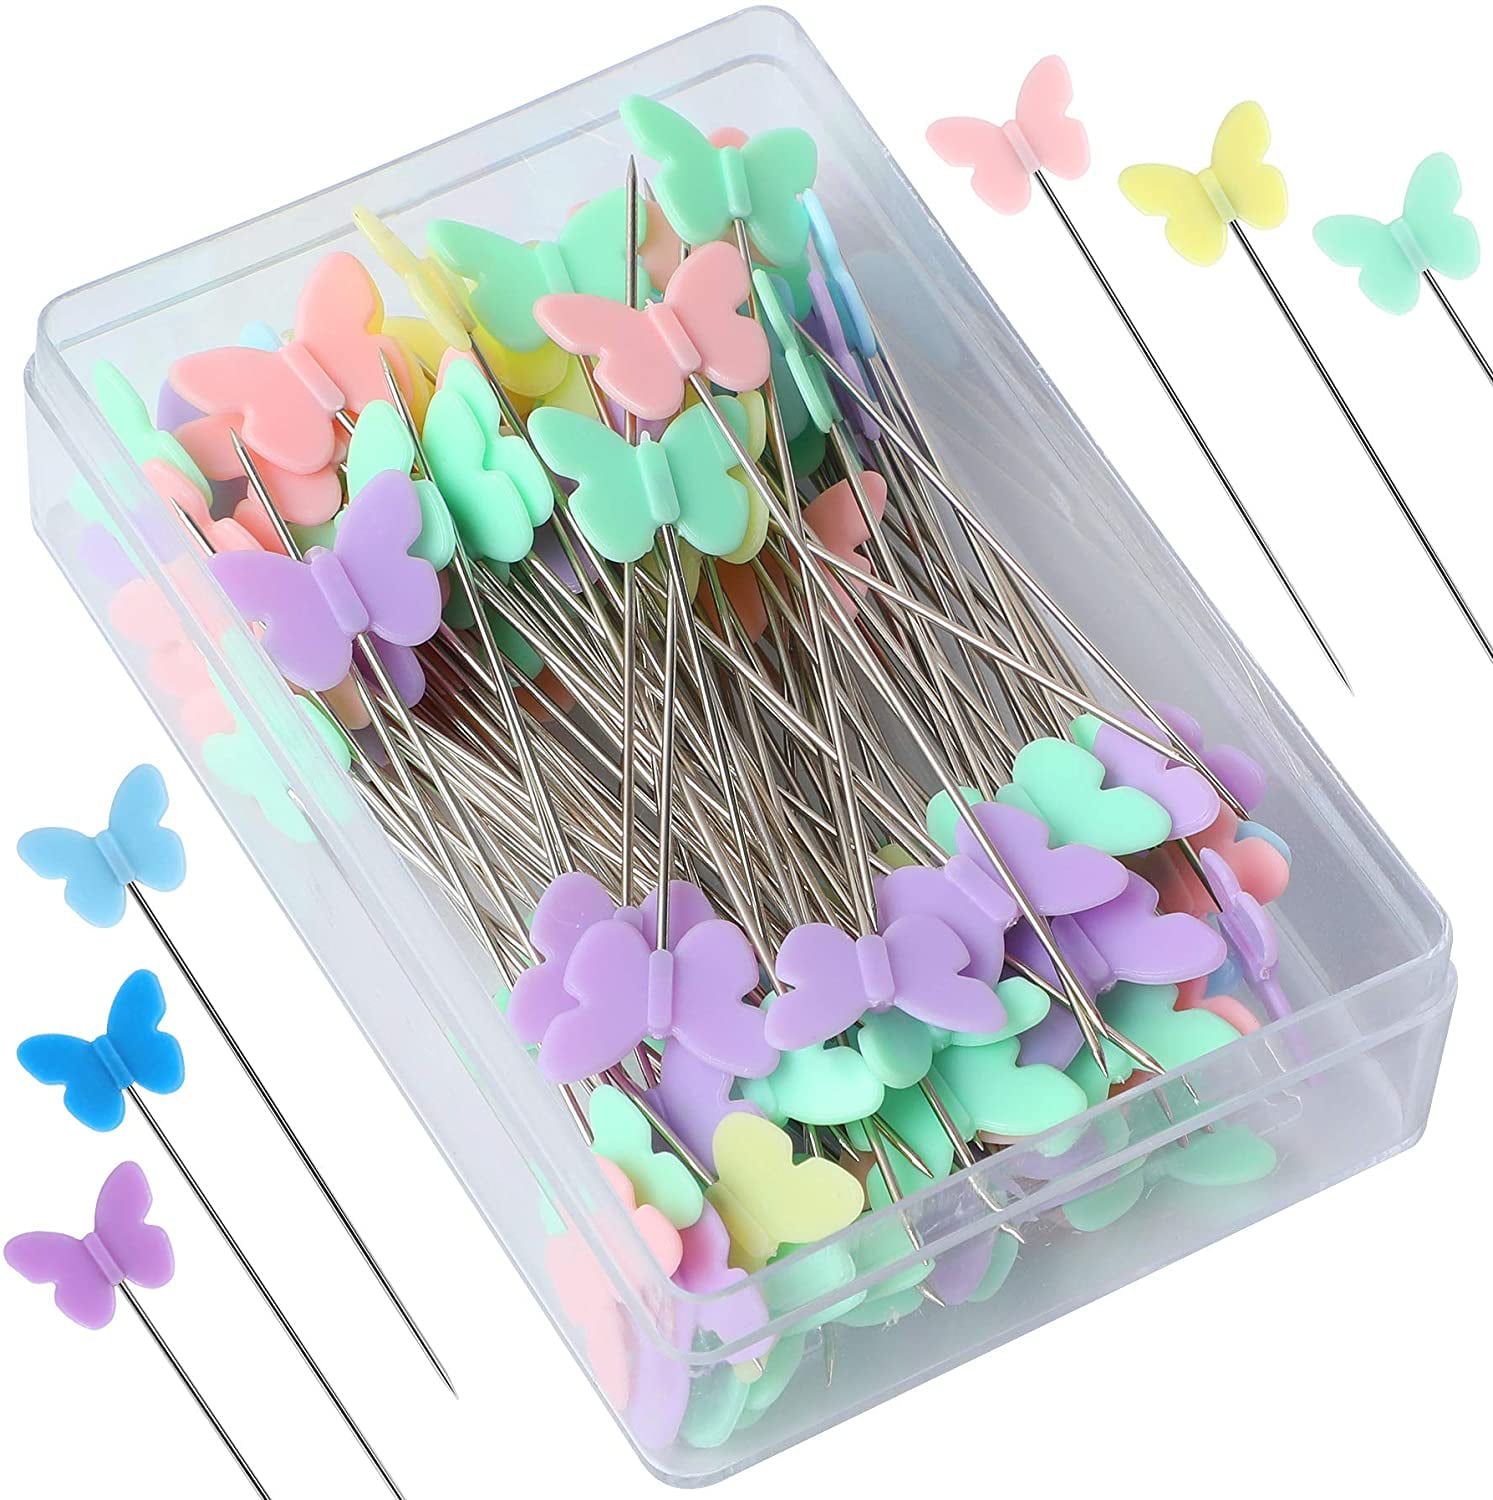 Quilting Pins with Cases,400 Pieces LIUMANG Flat Button &Flower Head Pins,Straight Pins 